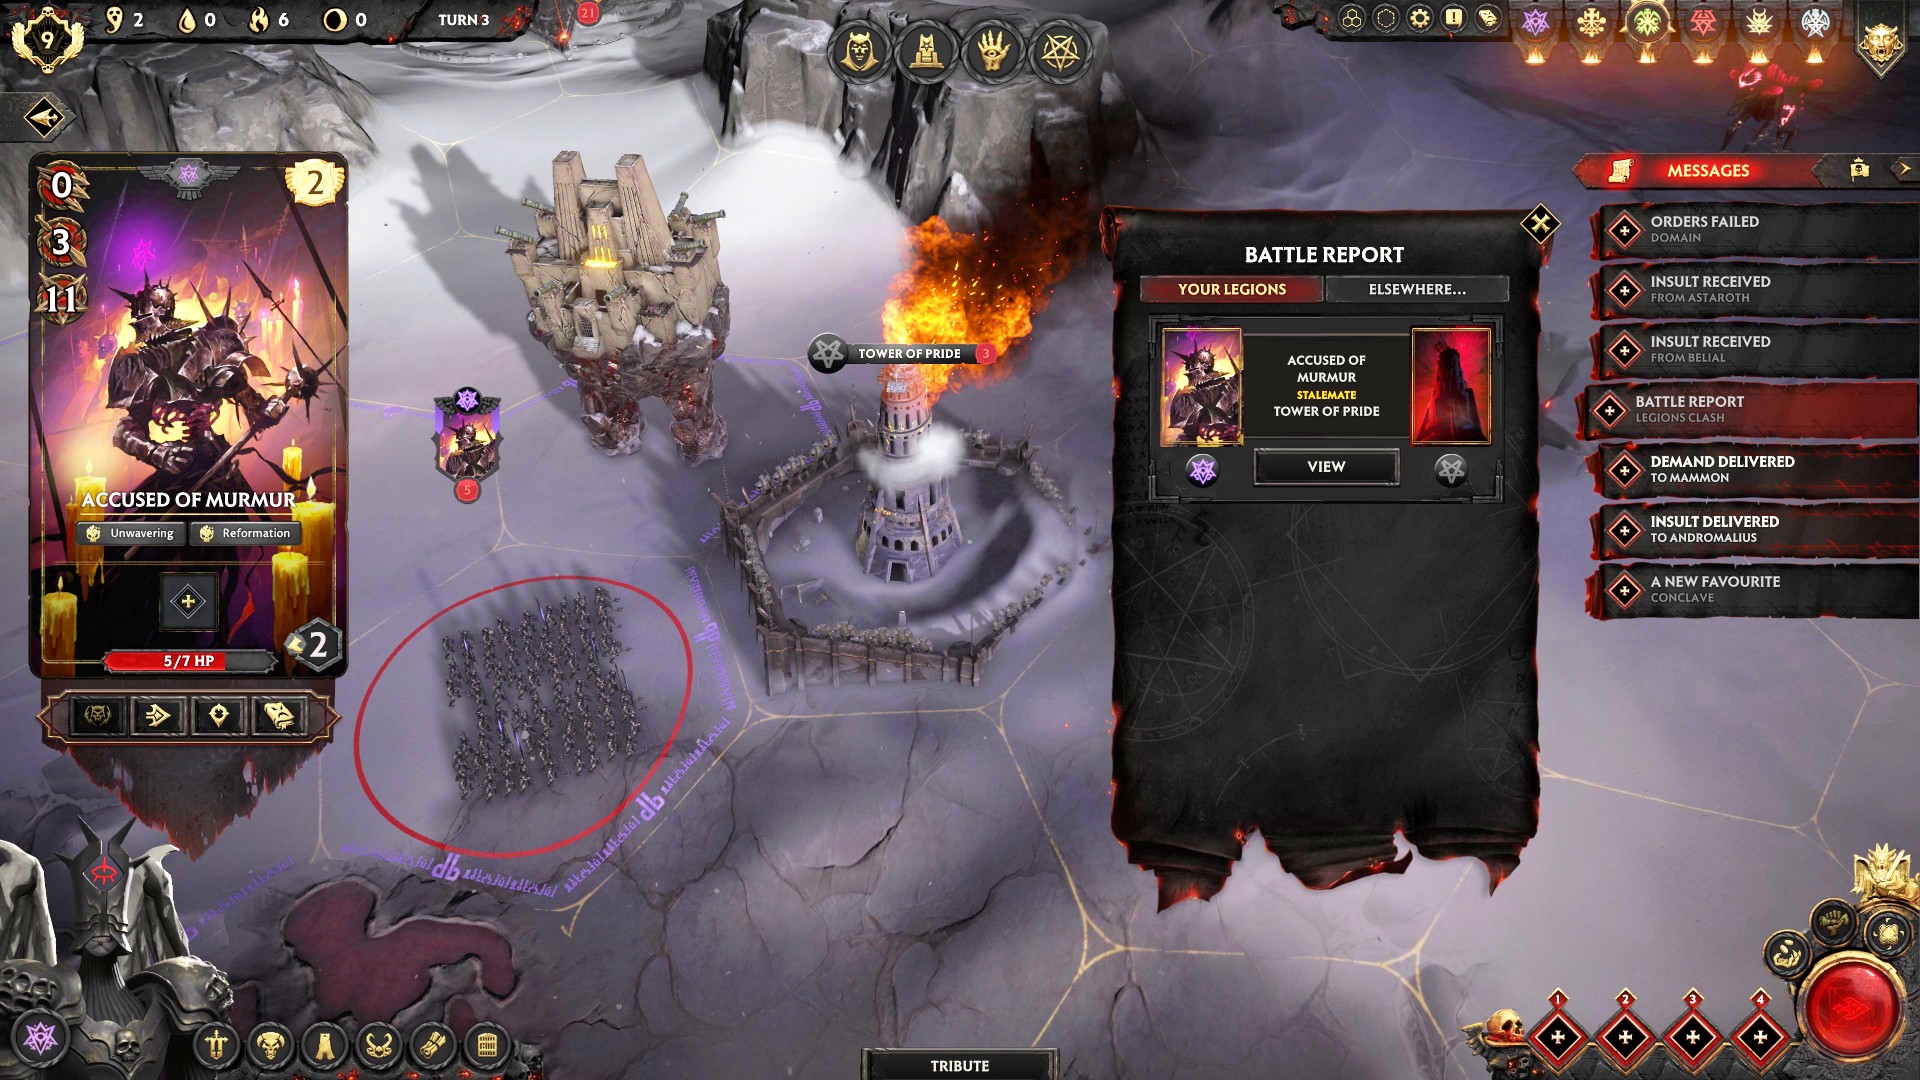 Solium Infernum Steam demo free: A map of Hell from strategy game Solium Infernum